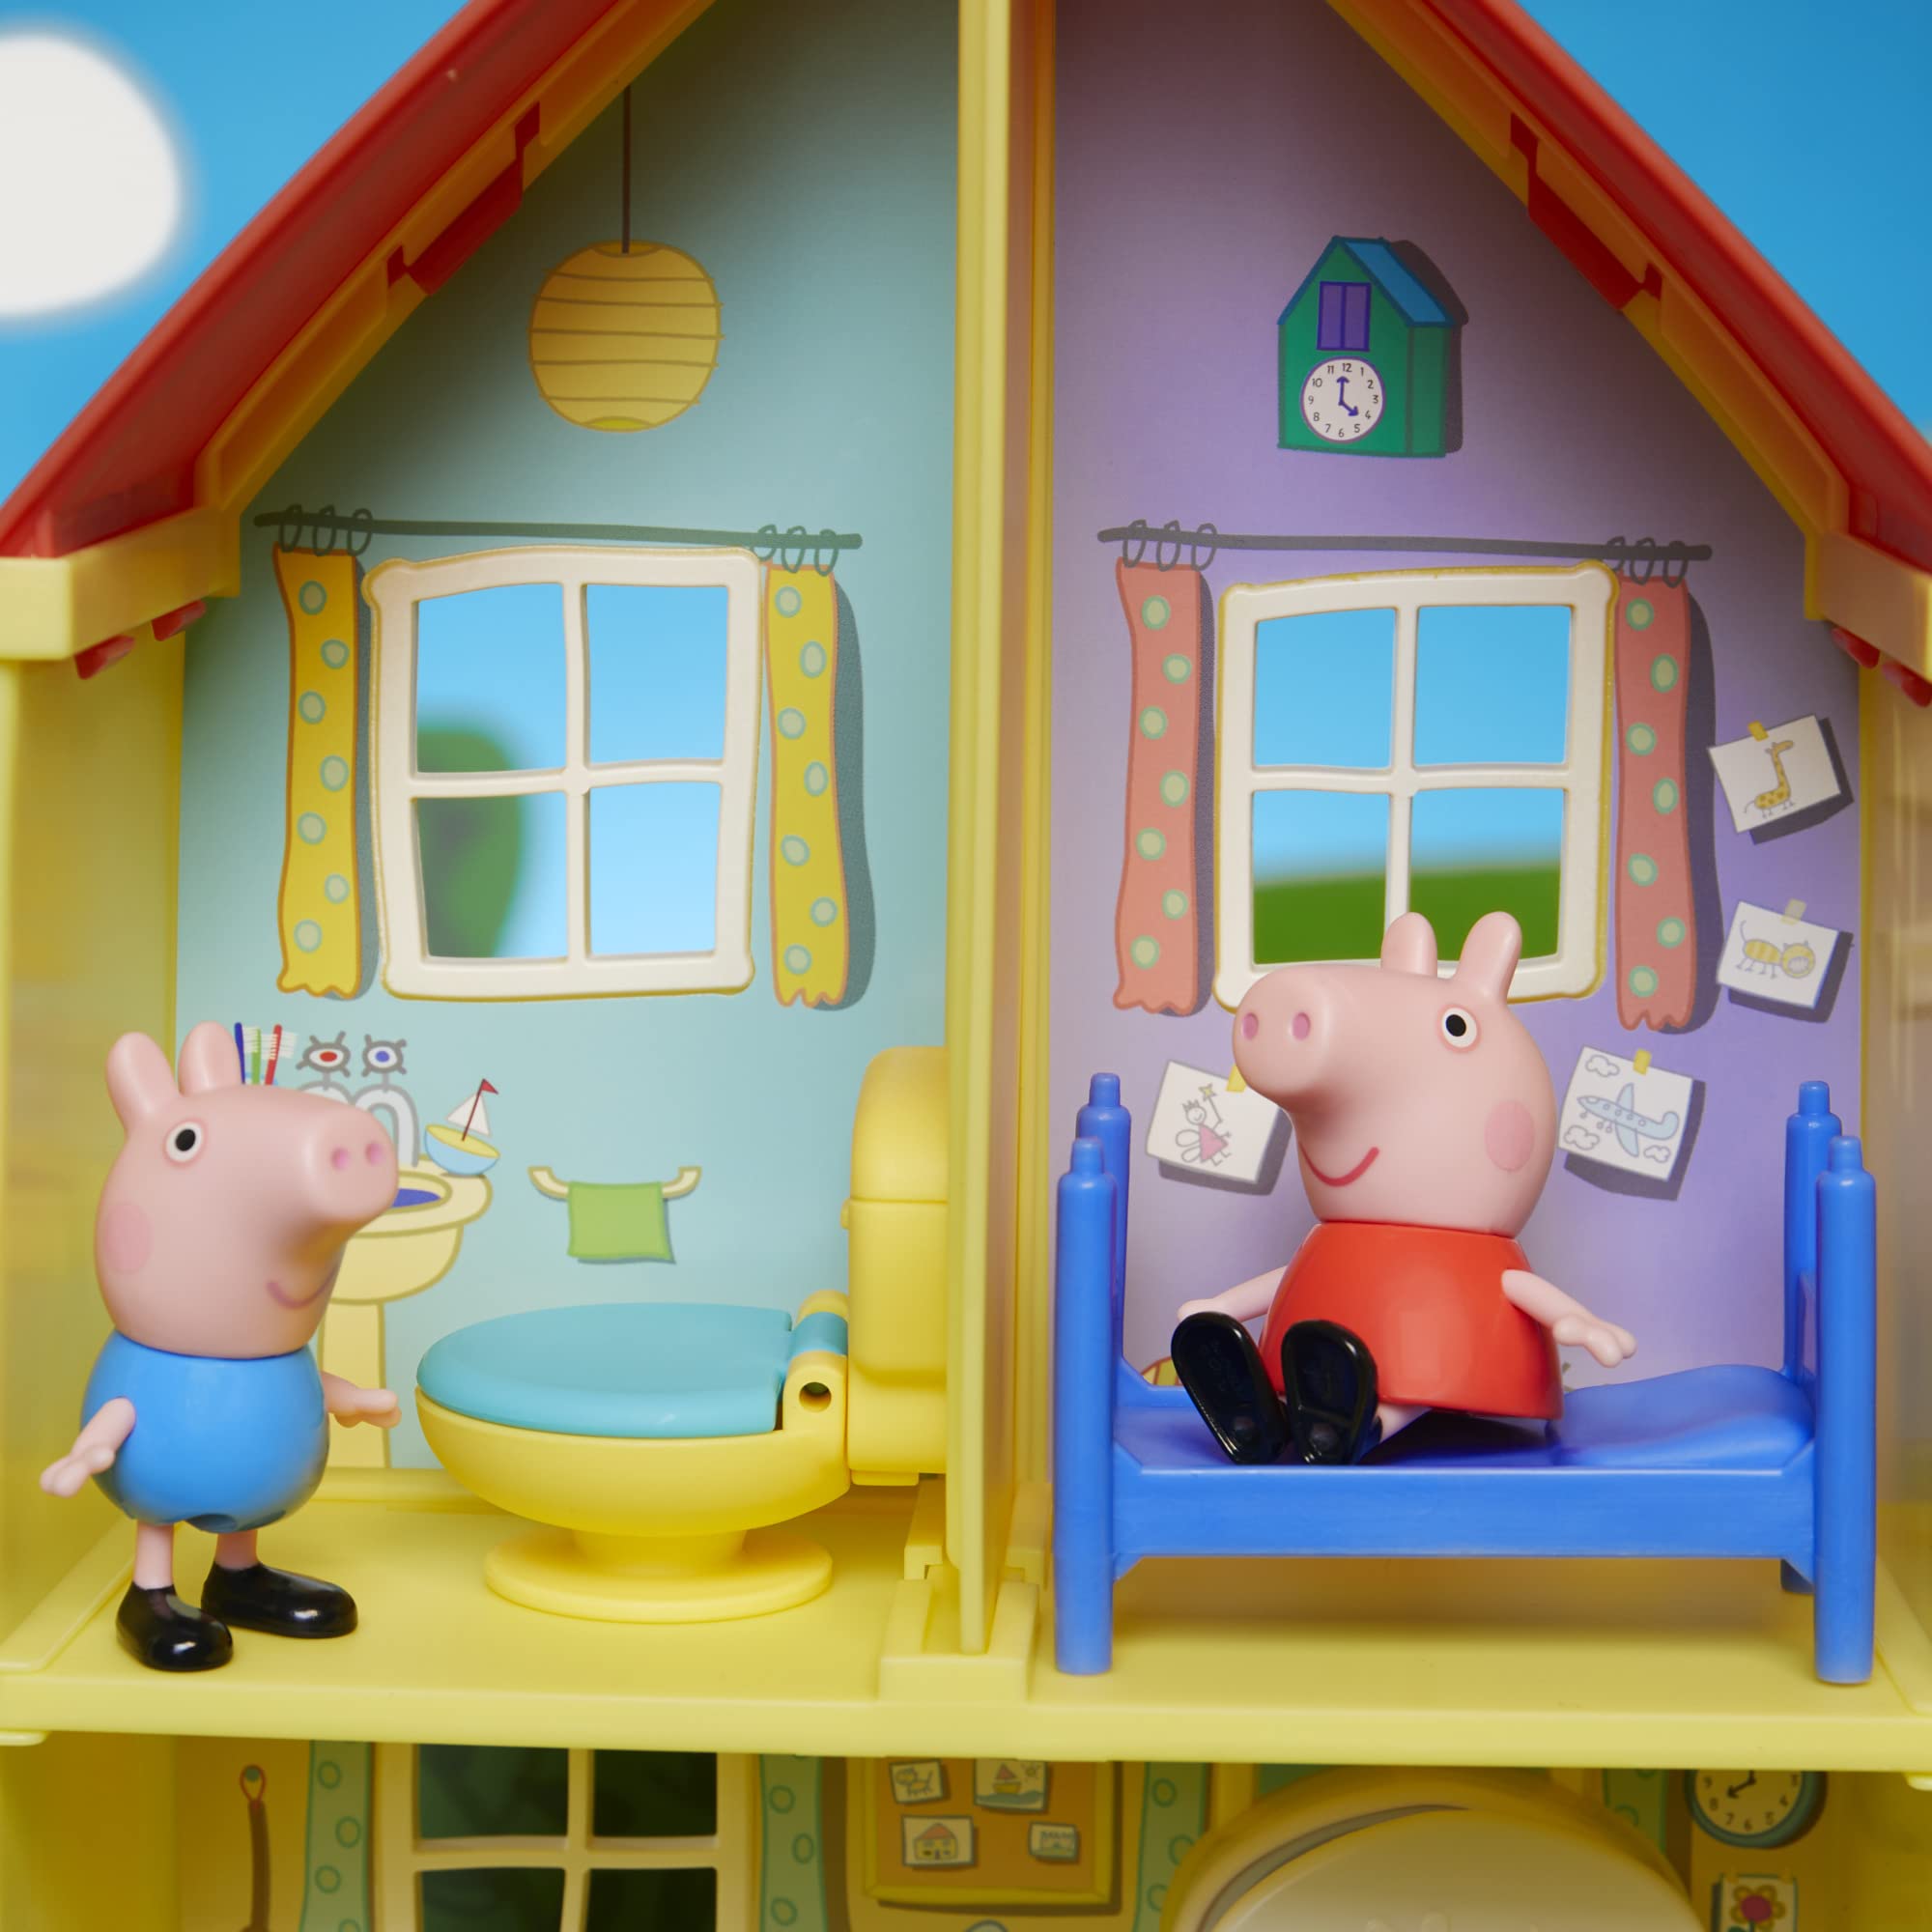 Peppa Pig Toys Peppa's Family Home Combo , Peppa Pig House Playset with 4 Figures and Car , Preschool Toys for 3 Year Old Girls and Boys and Up